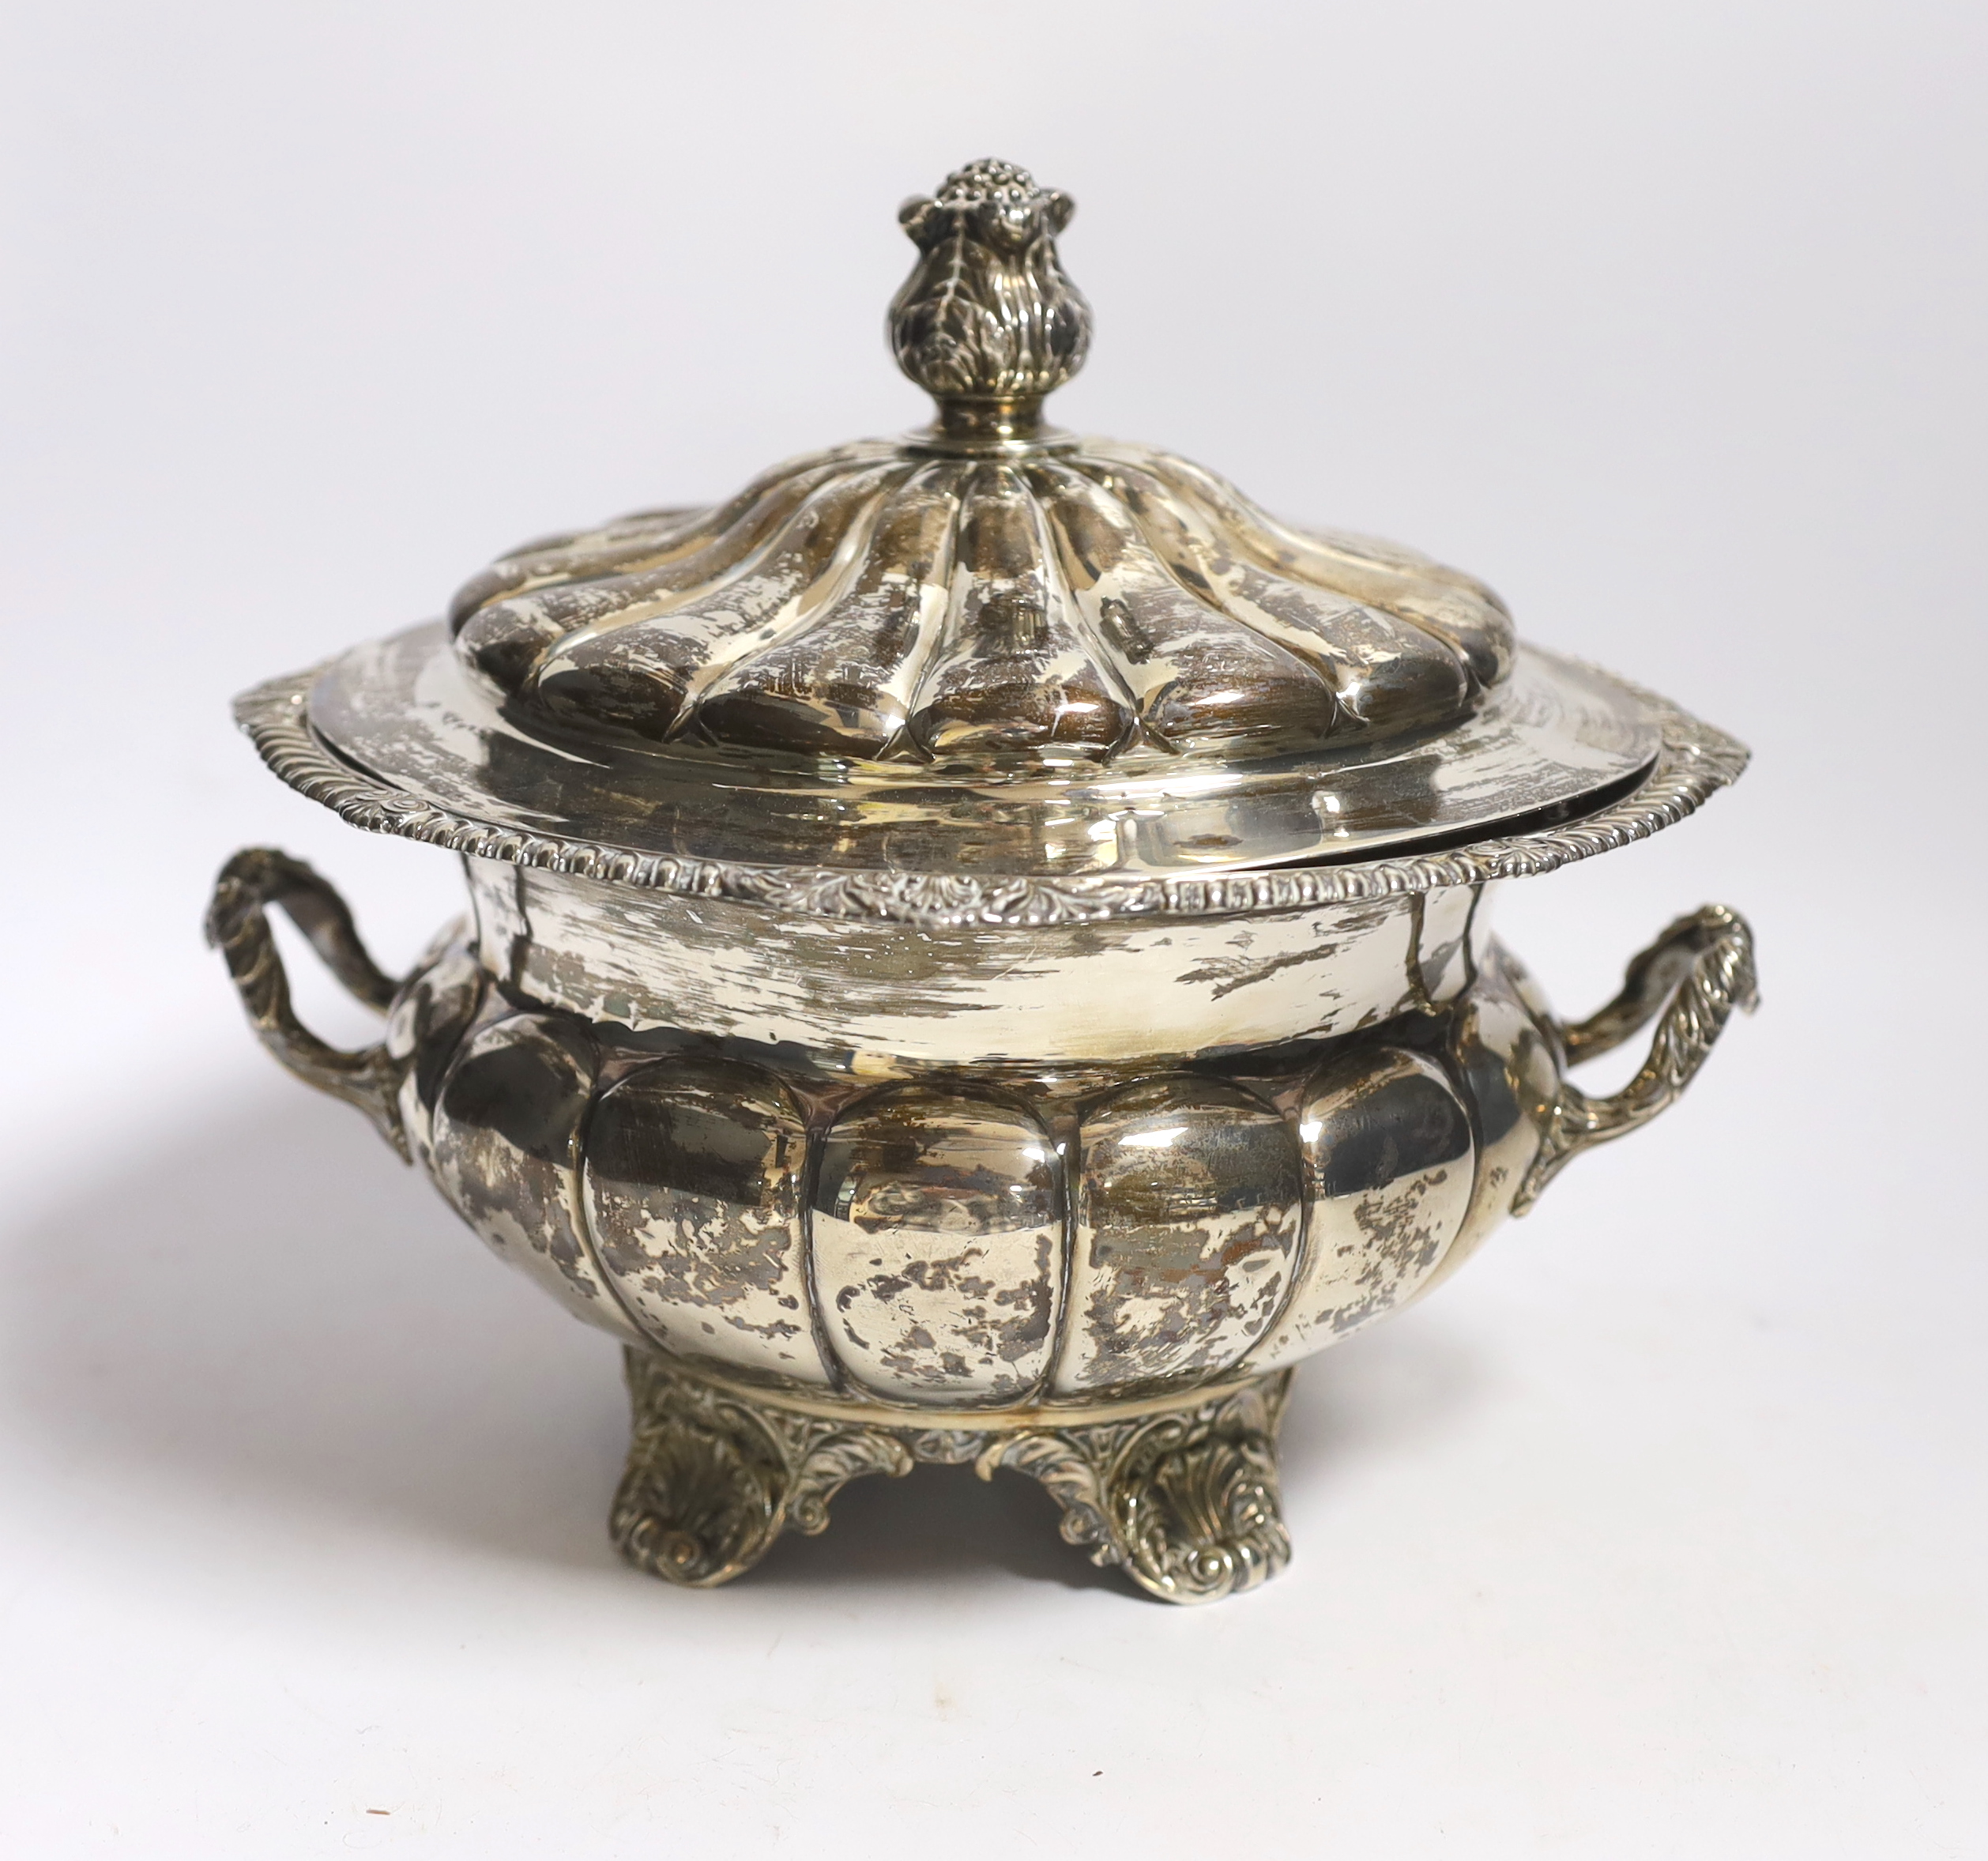 A George IV silver two handled vegetable tureen and cover, by Thomas Burwash, London, 1822 (marks on